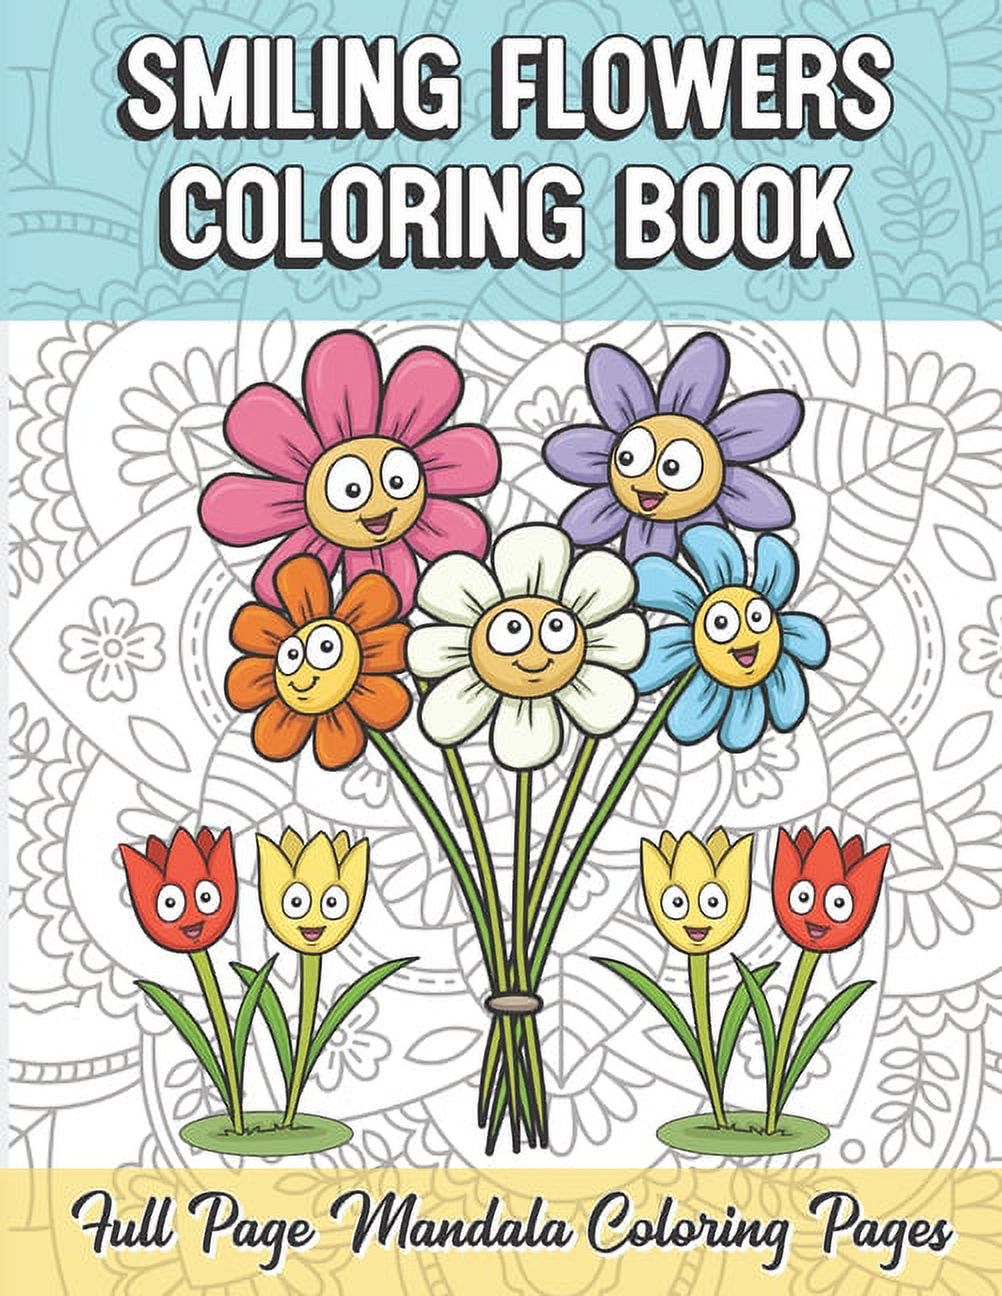 Smiling Flowers Coloring Book Full Page Mandala Coloring Pages: Color Book  with Mindfulness and Stress Relieving Designs with Mandala Patterns for